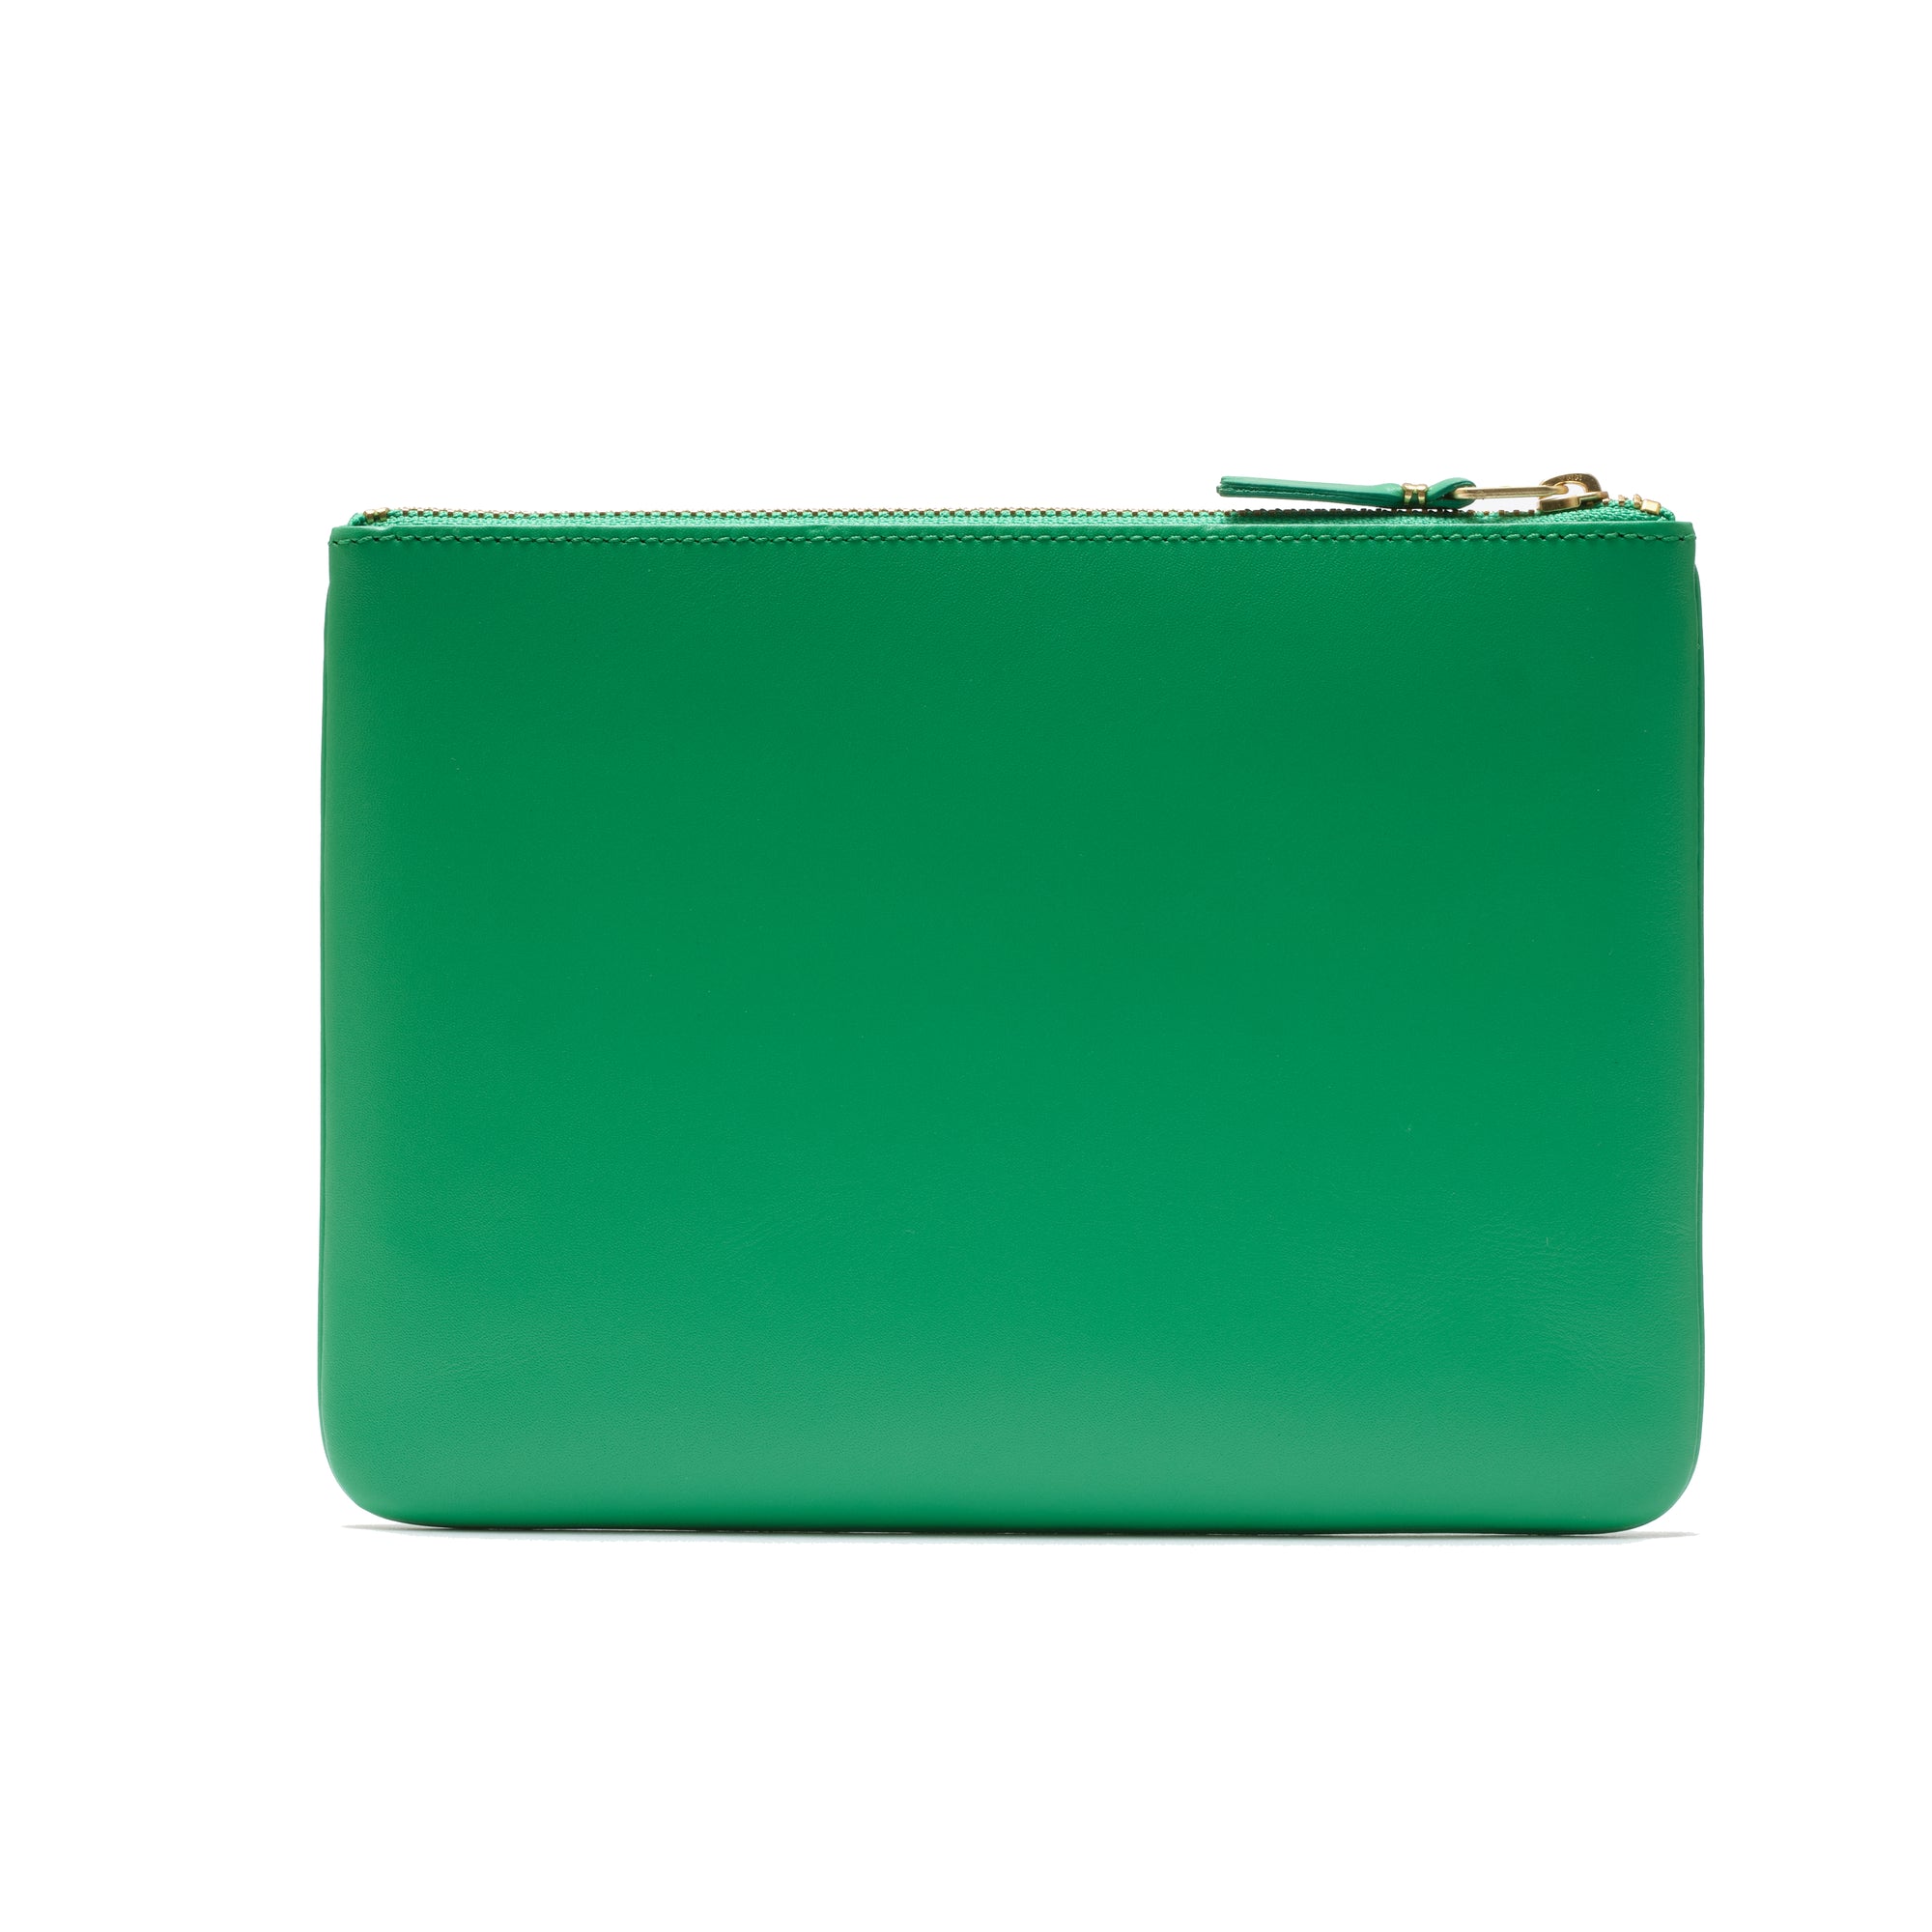 CDG WALLET - Colored Leather Line-A051 - (Green) view 2